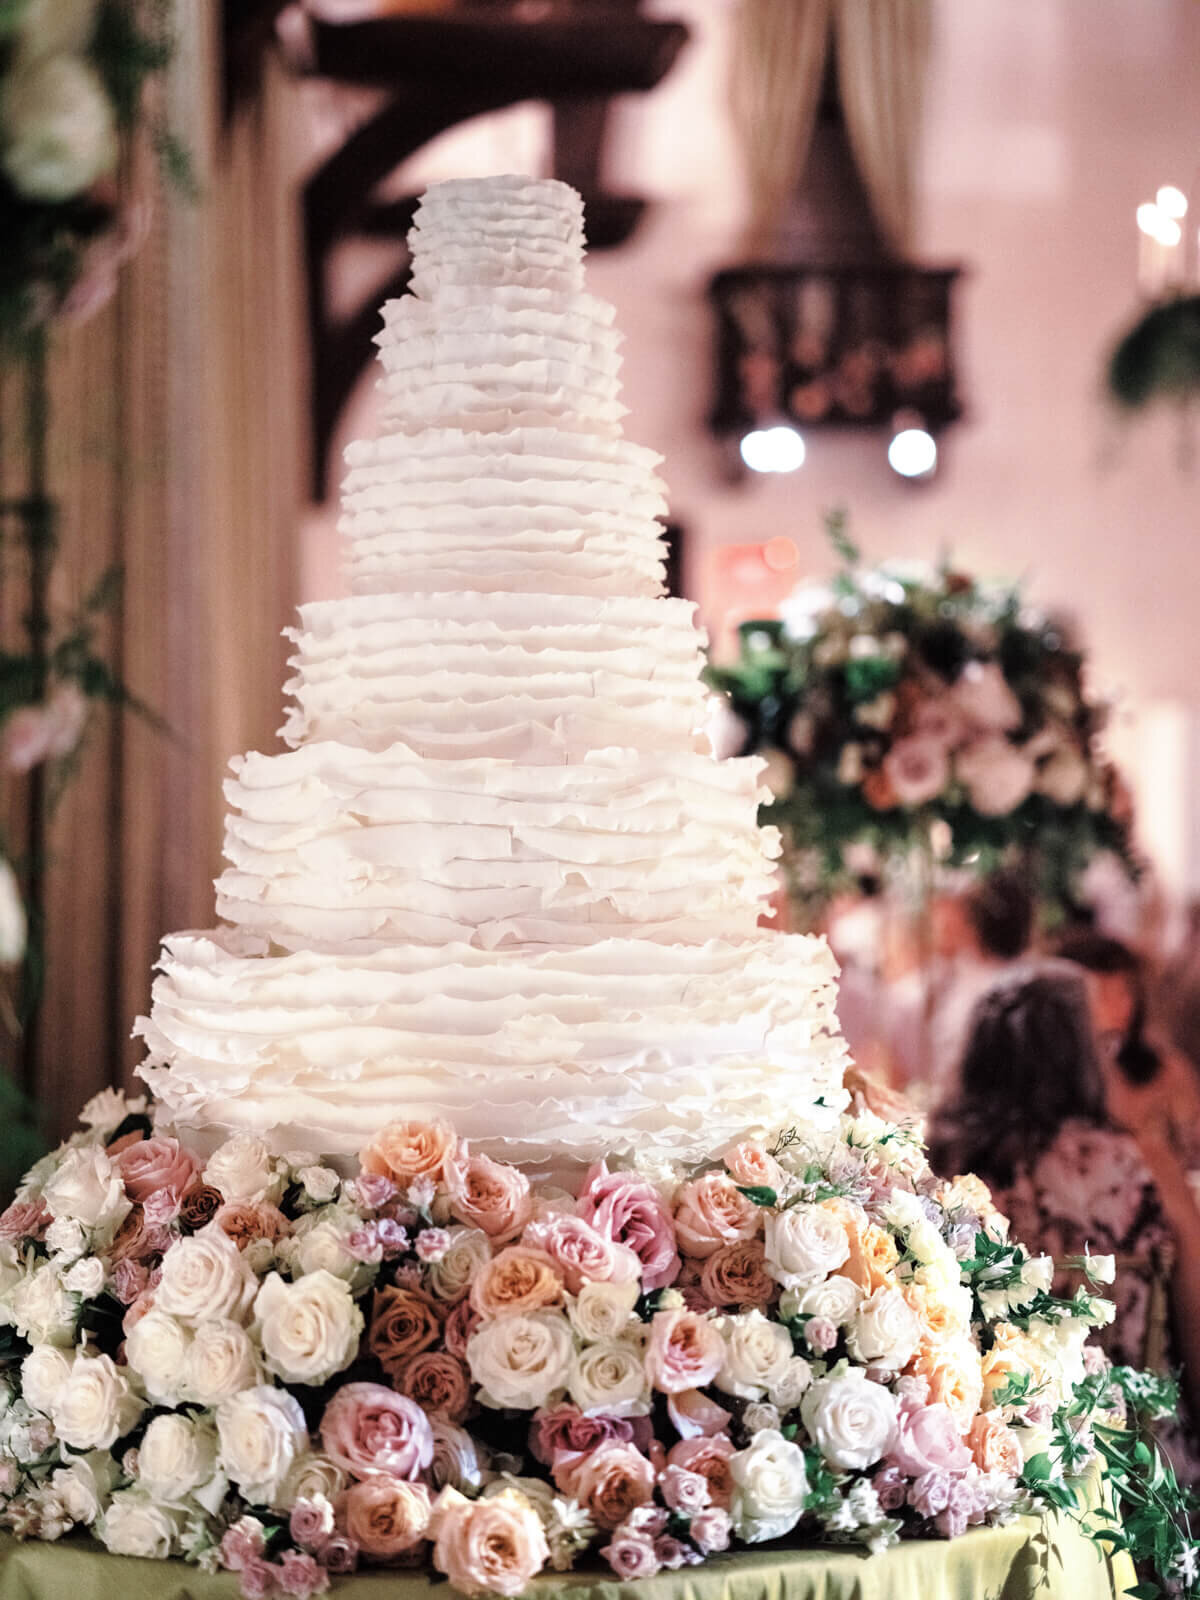 A large, white, six-layered wedding cake, with many flowers of white, pink, old rose, and peach colors at the bottom